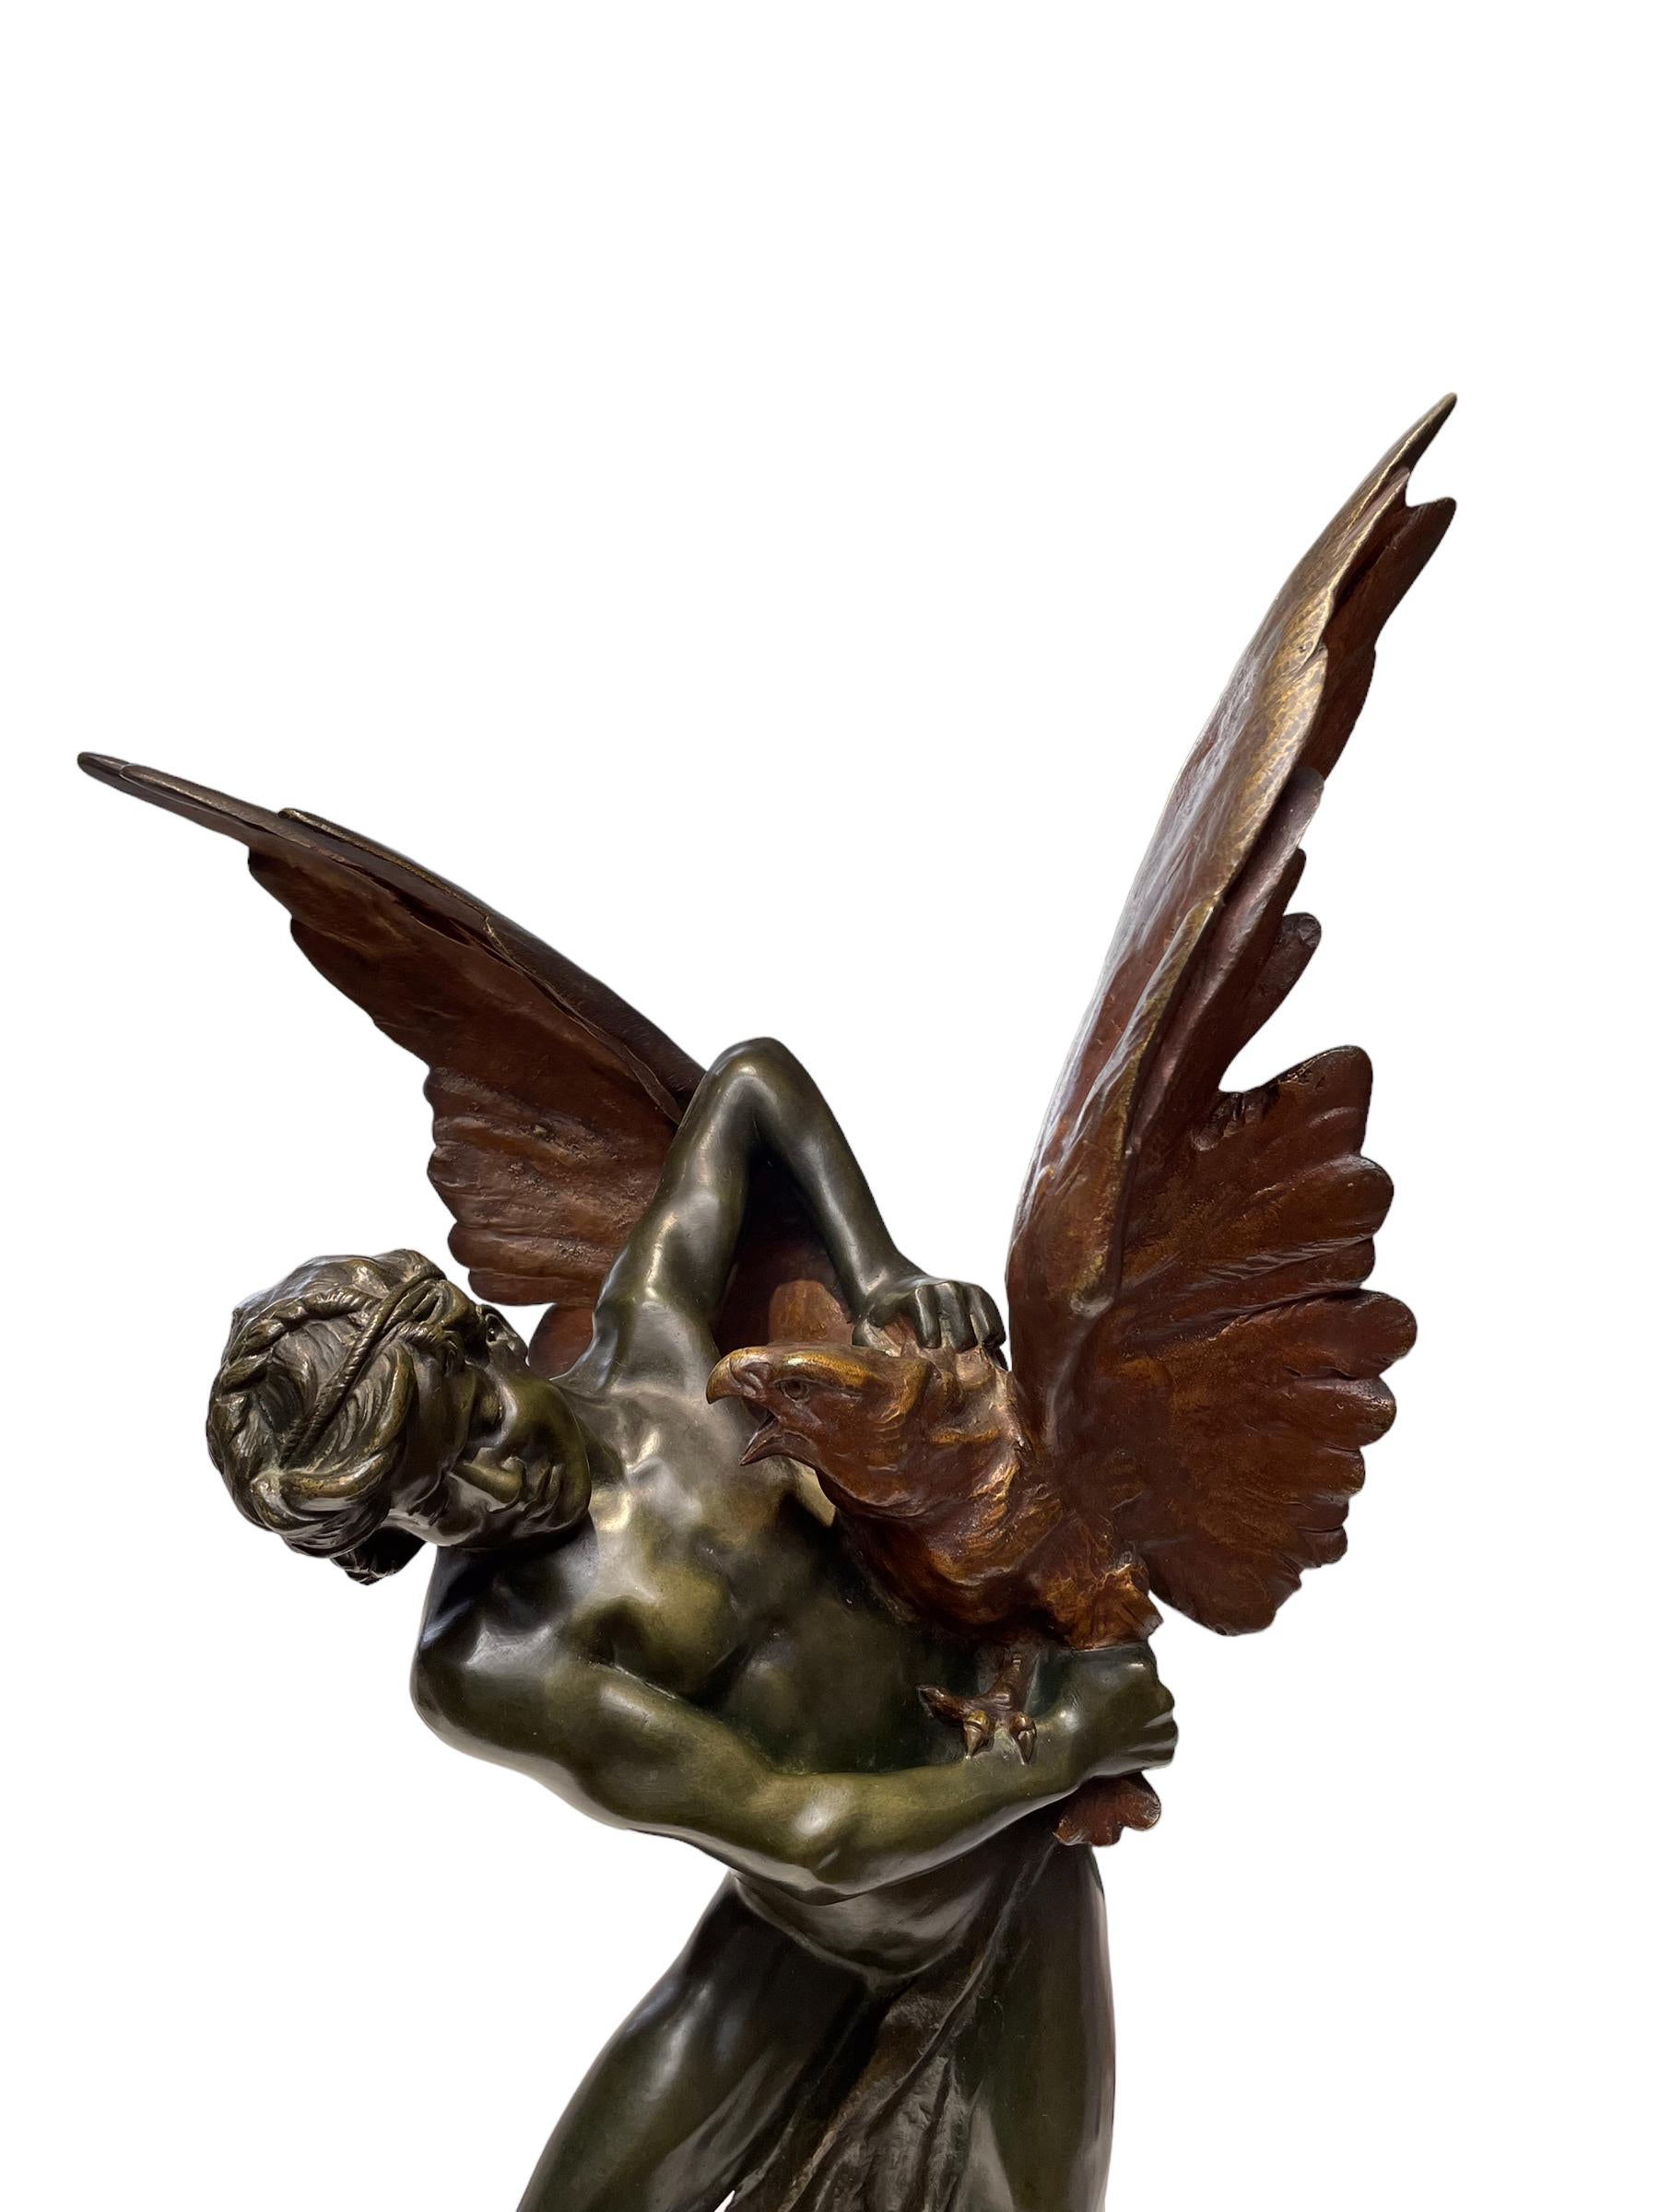 An imposing bronze sculpture by Jean Verschneider (1872-1943).
This large bronze figure of ‘A young Hannibal Strangling an Eagle’, with the eagle gilt patinated, is stamped ‘Jean Verschneider’, on the base as well as a circular foundry mark and